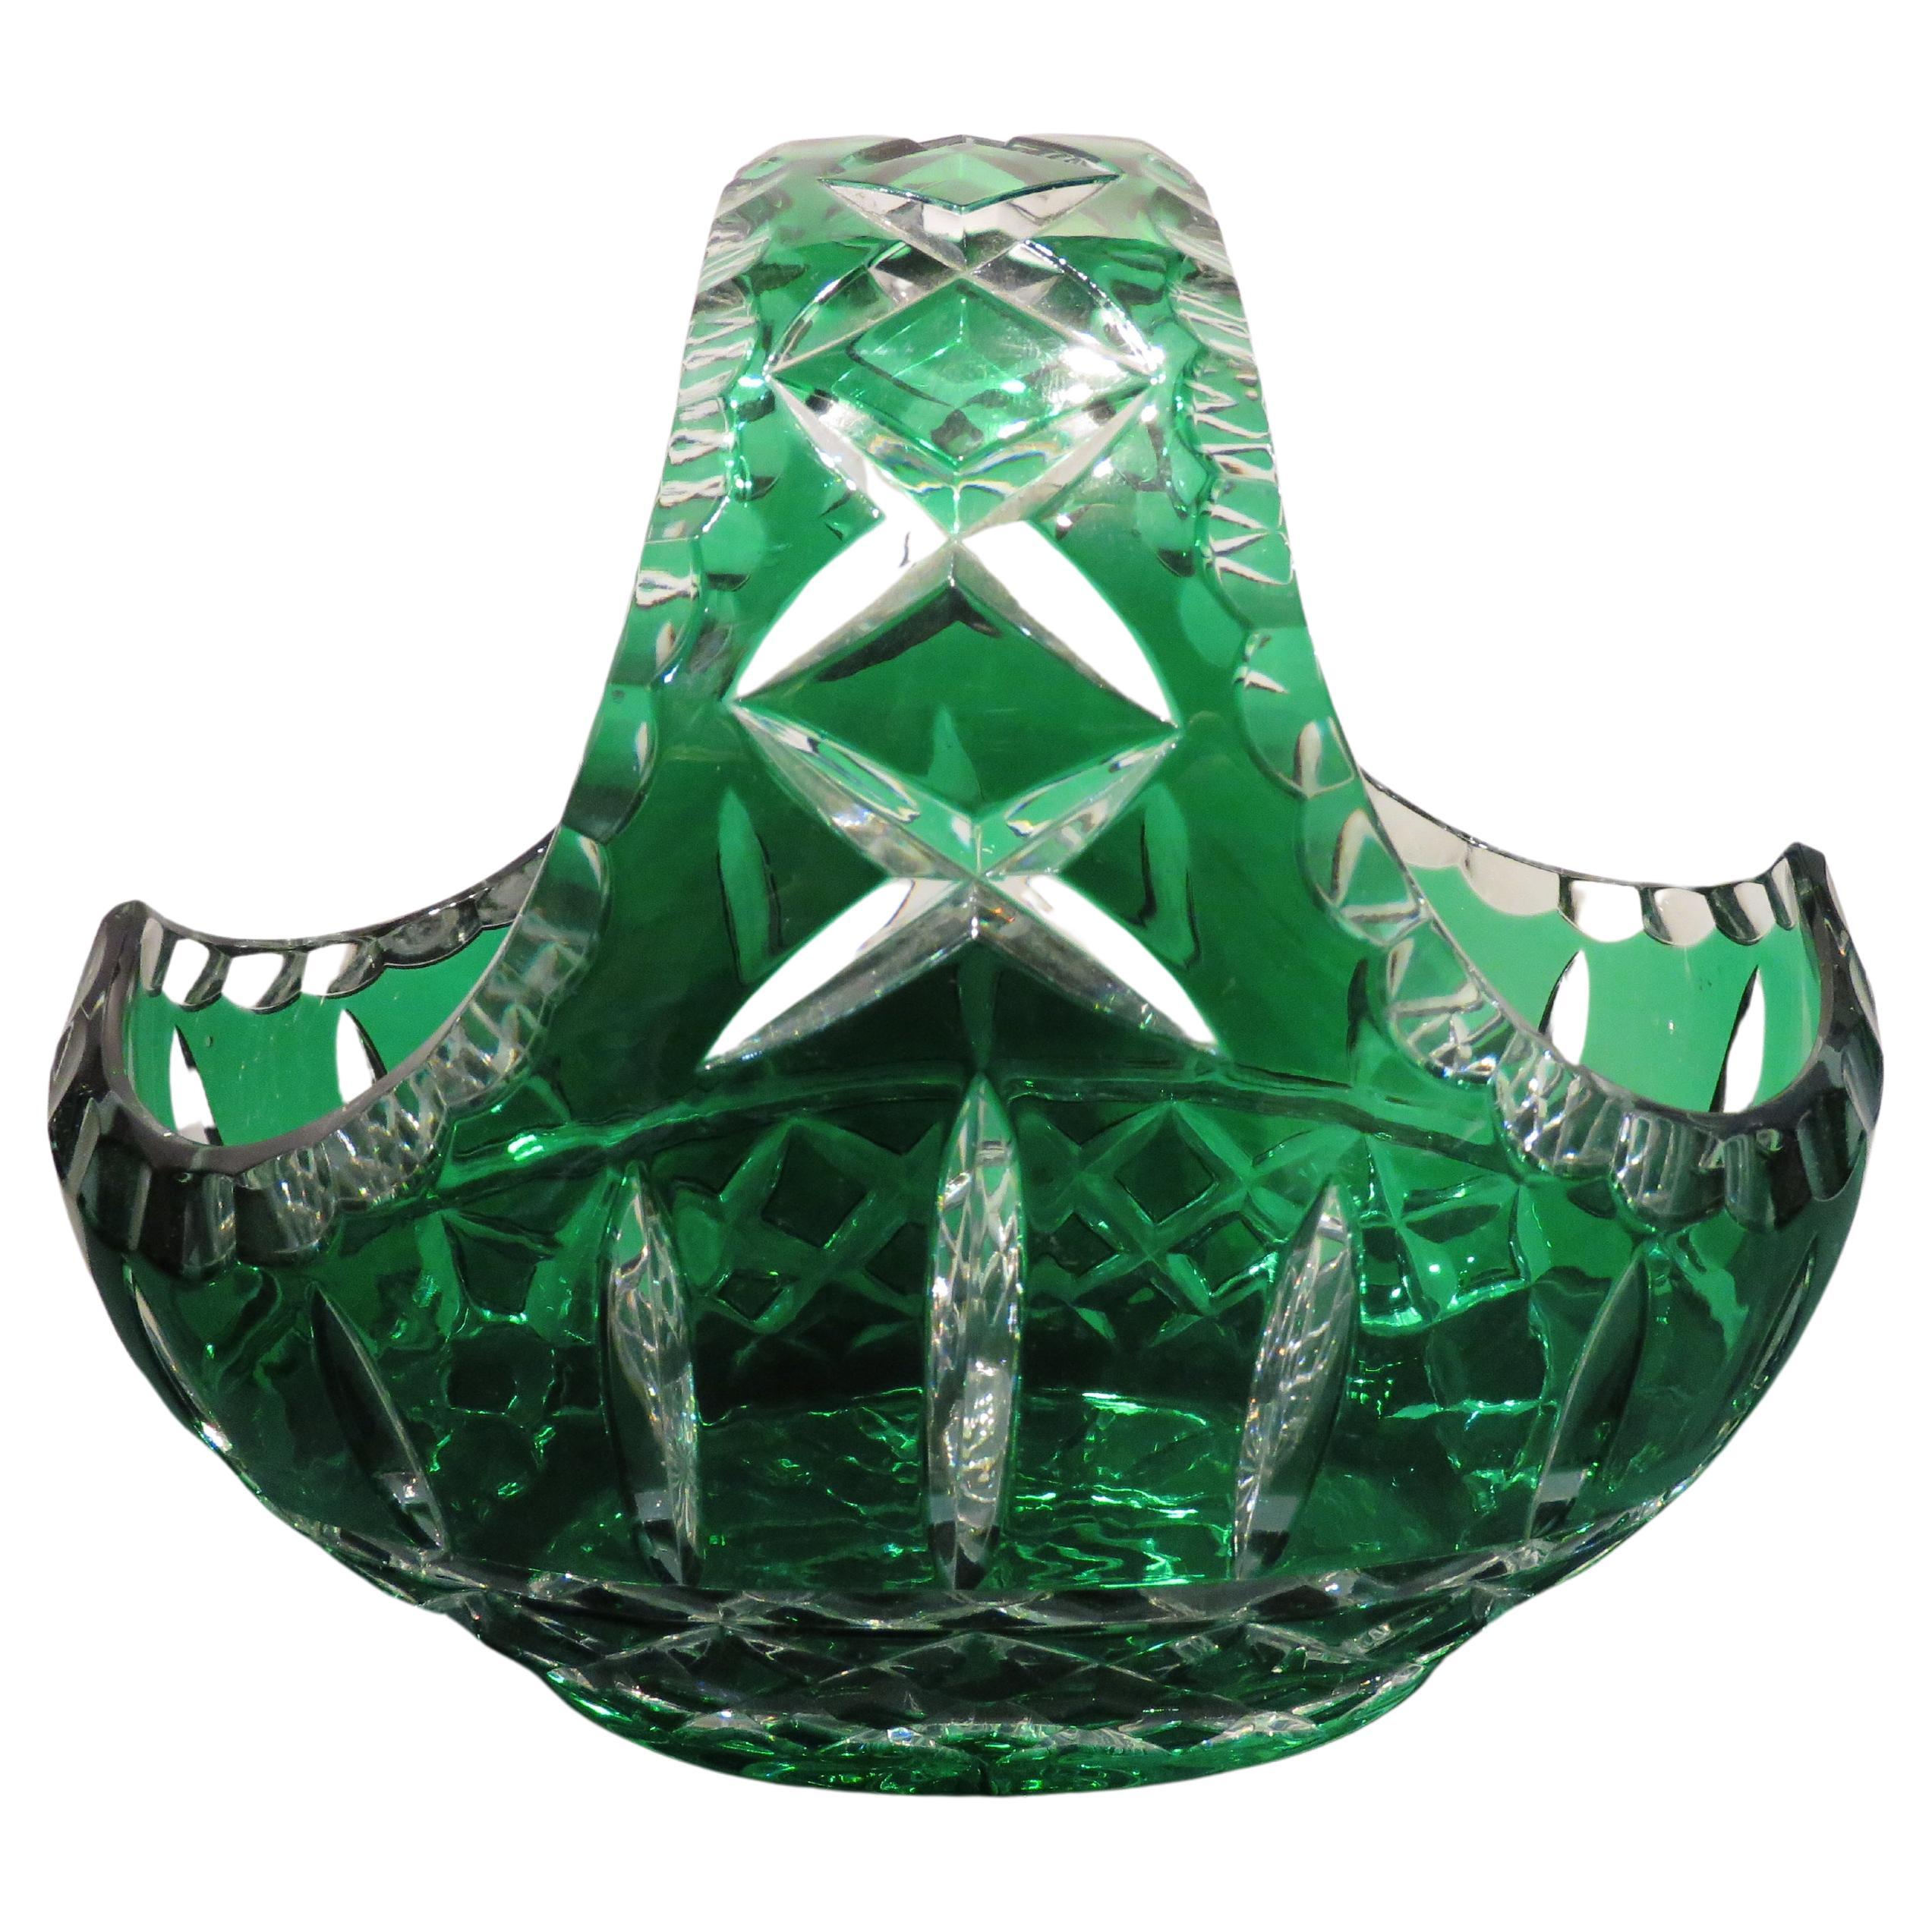 RARE 1900s Large Handcut Heavy Etched Diamond Cut Emerald Crystal Basket For Sale